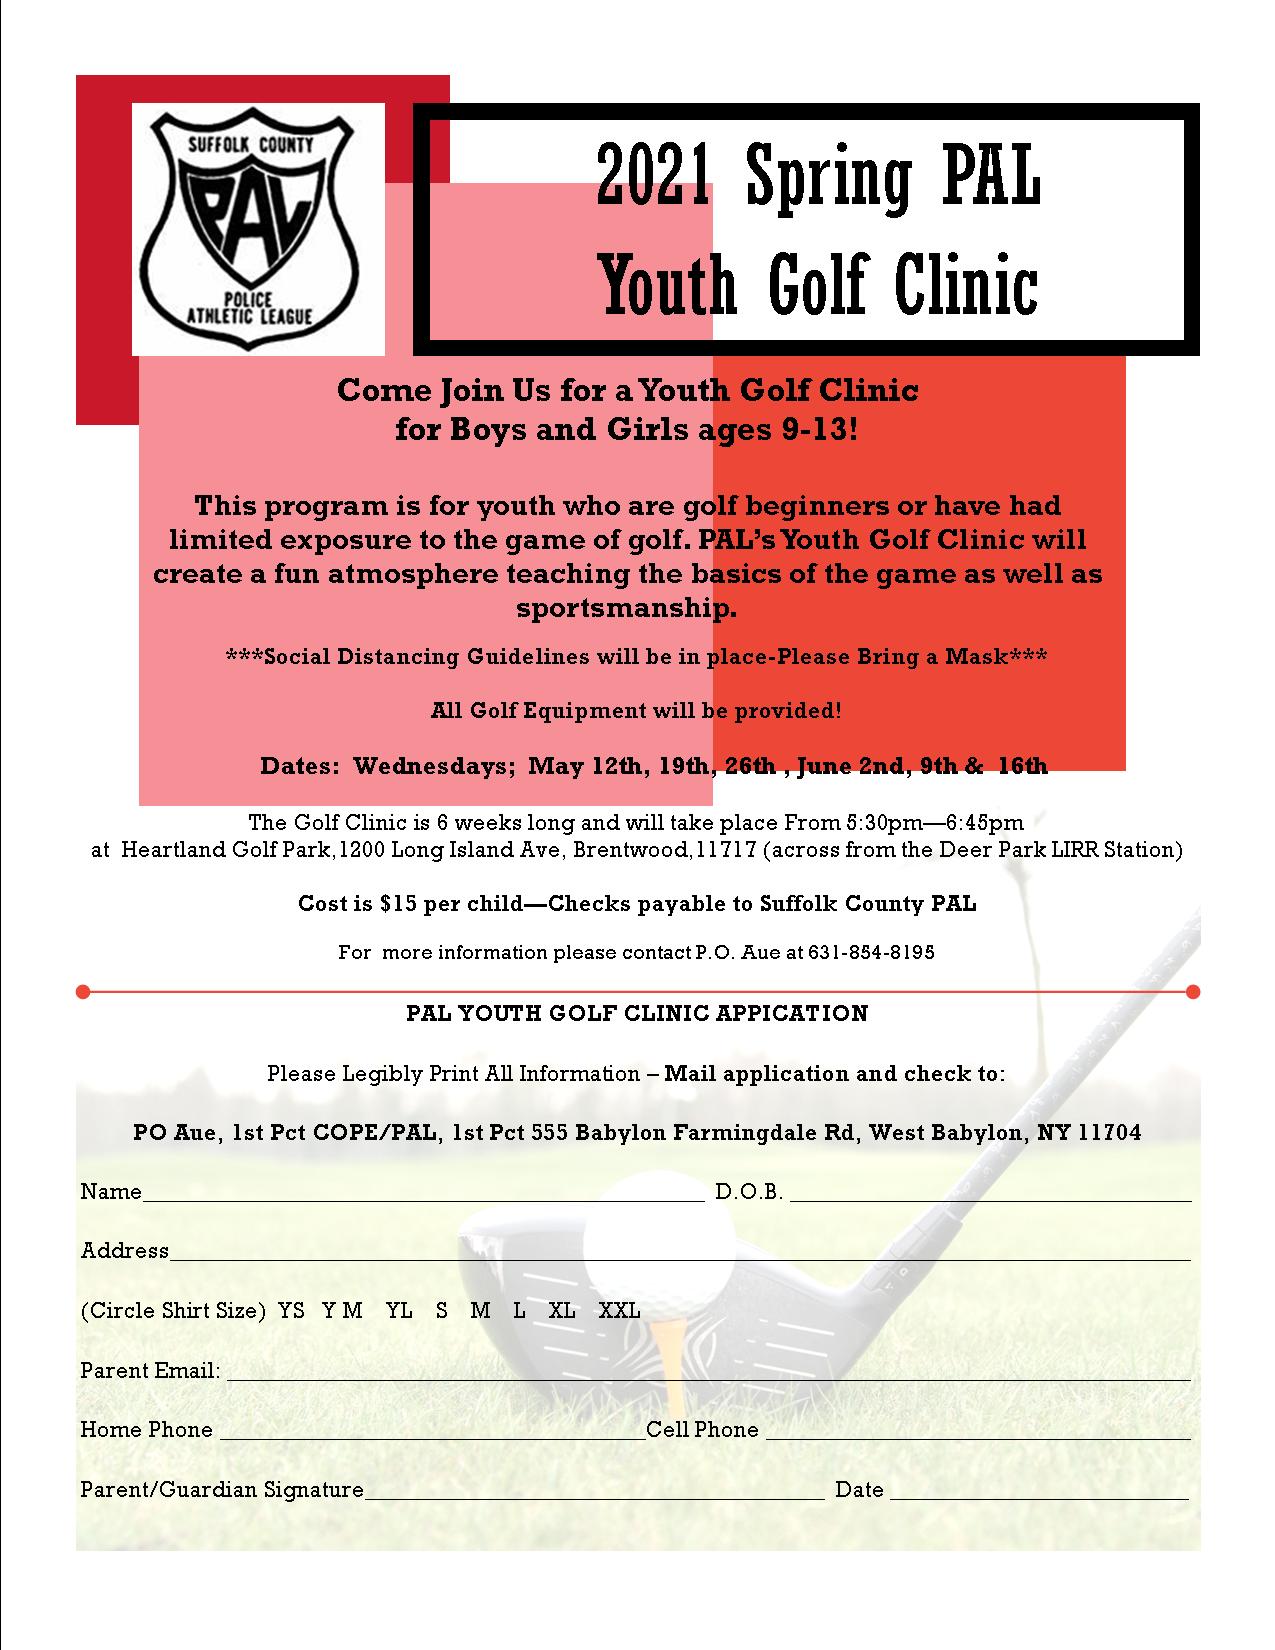 flyer describing the upcoming PAL PAL Youth Golf Clinic events